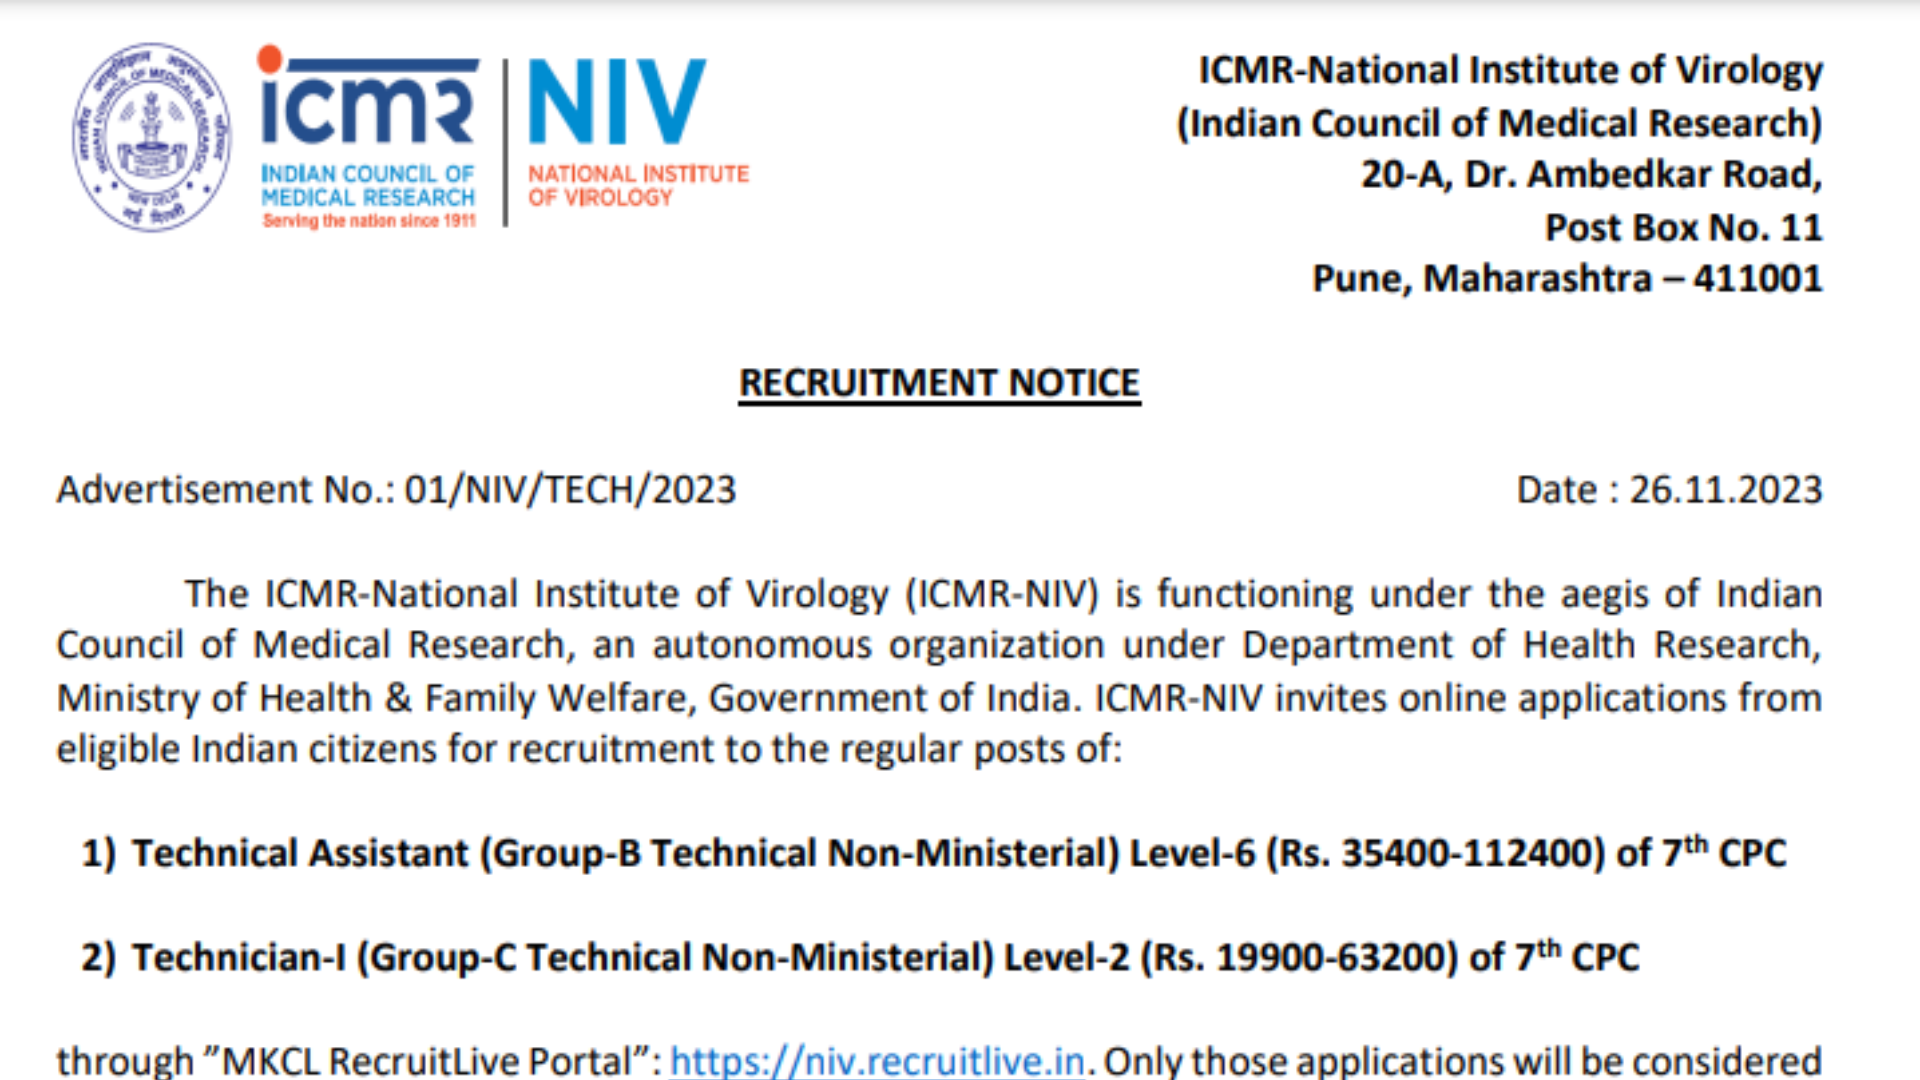 ICMR NIV Recruitment 2023 Notification and Online Application Form for Technical Posts